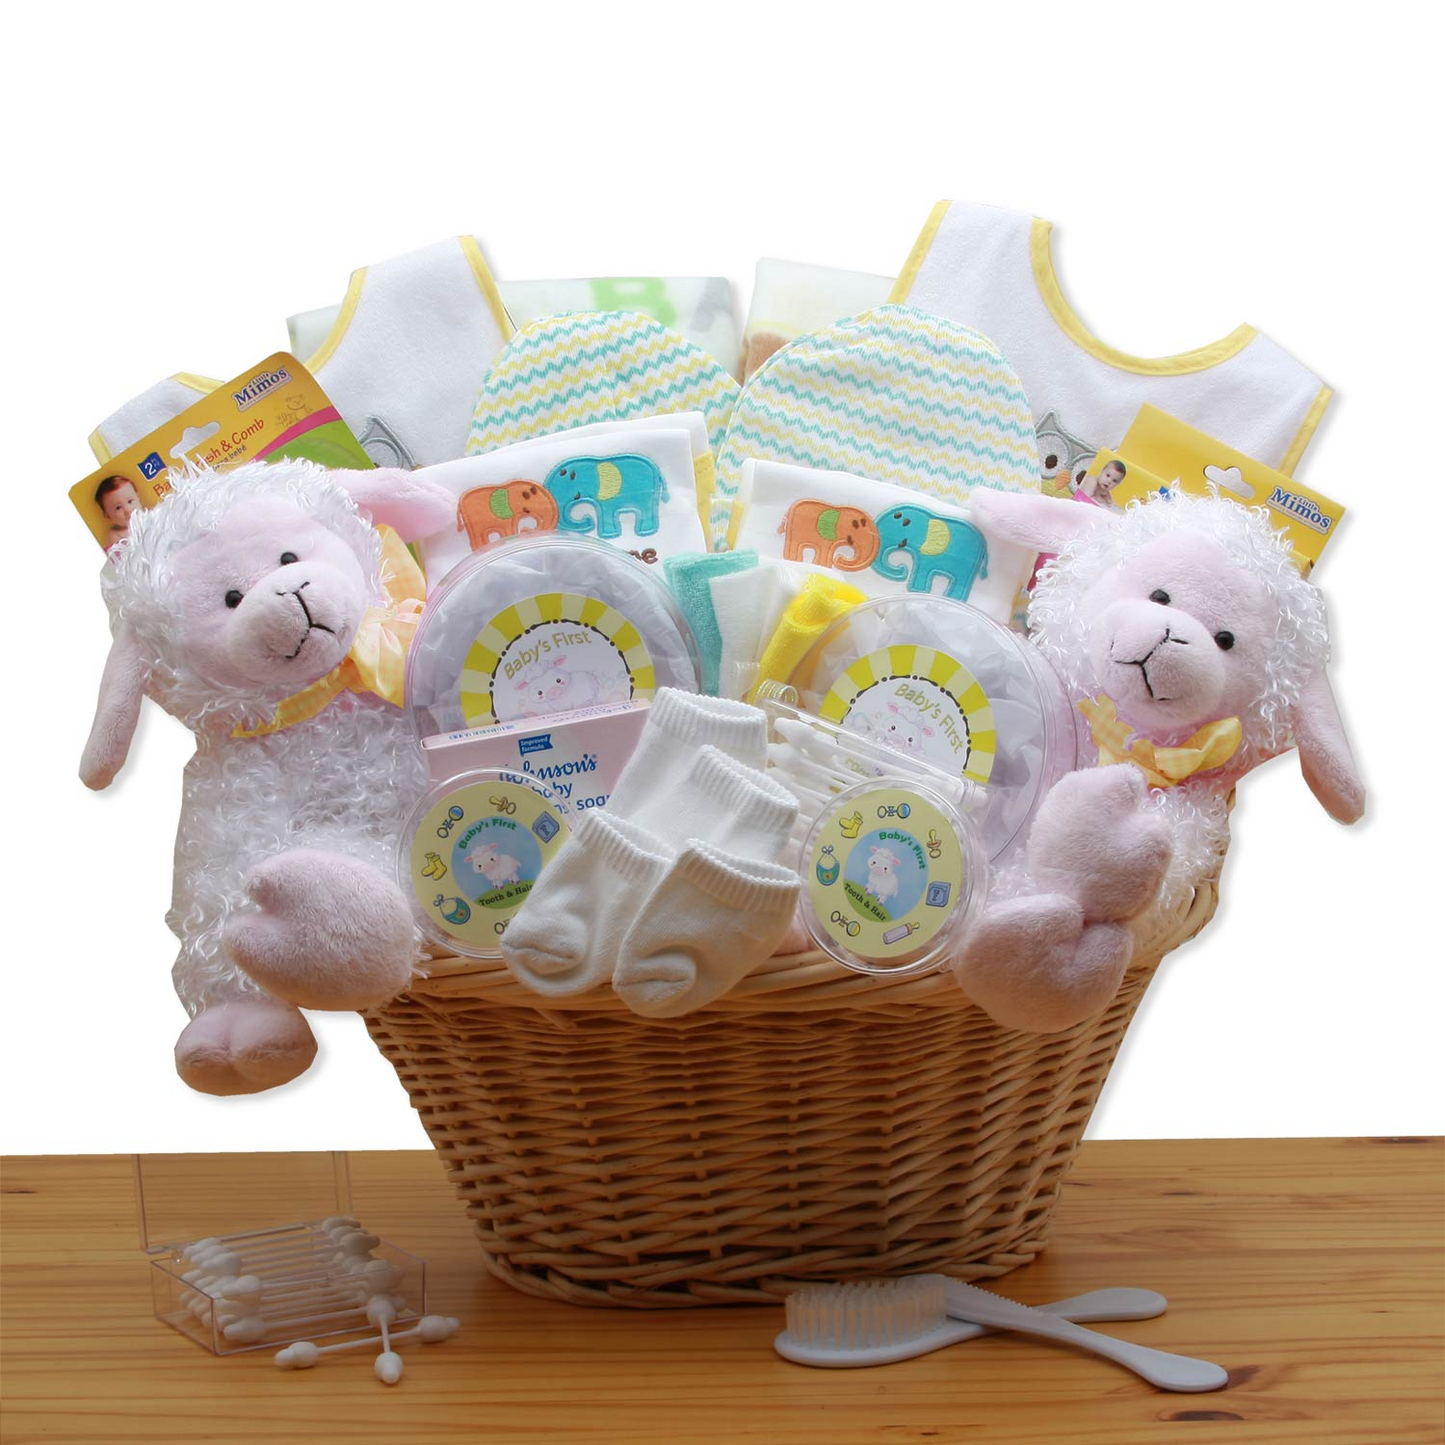 Double Delight Twins New Baby Gift Basket - Yellow - Baby Bath Set - Baby Shower Gifts